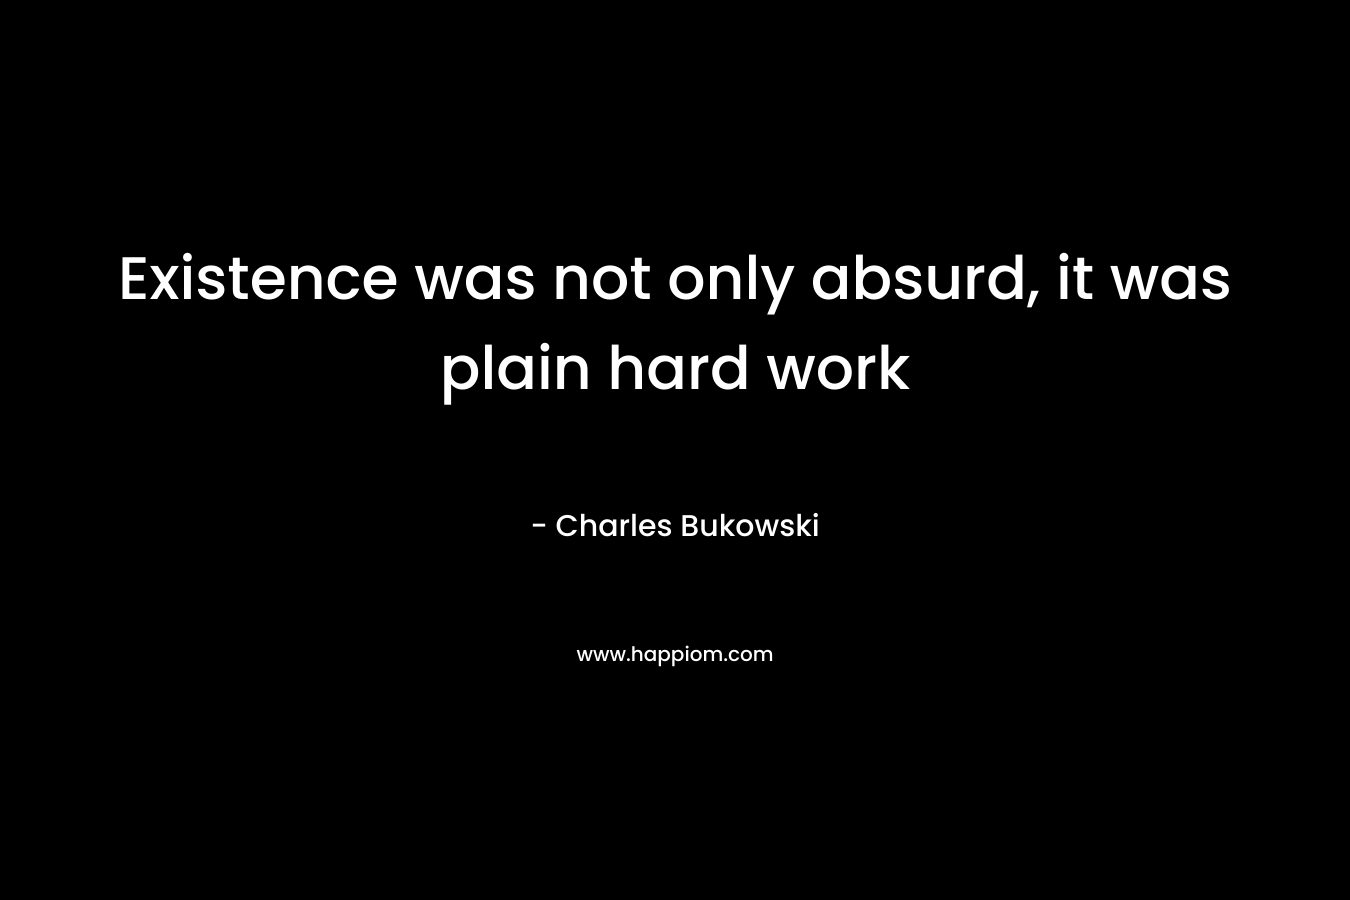 Existence was not only absurd, it was plain hard work